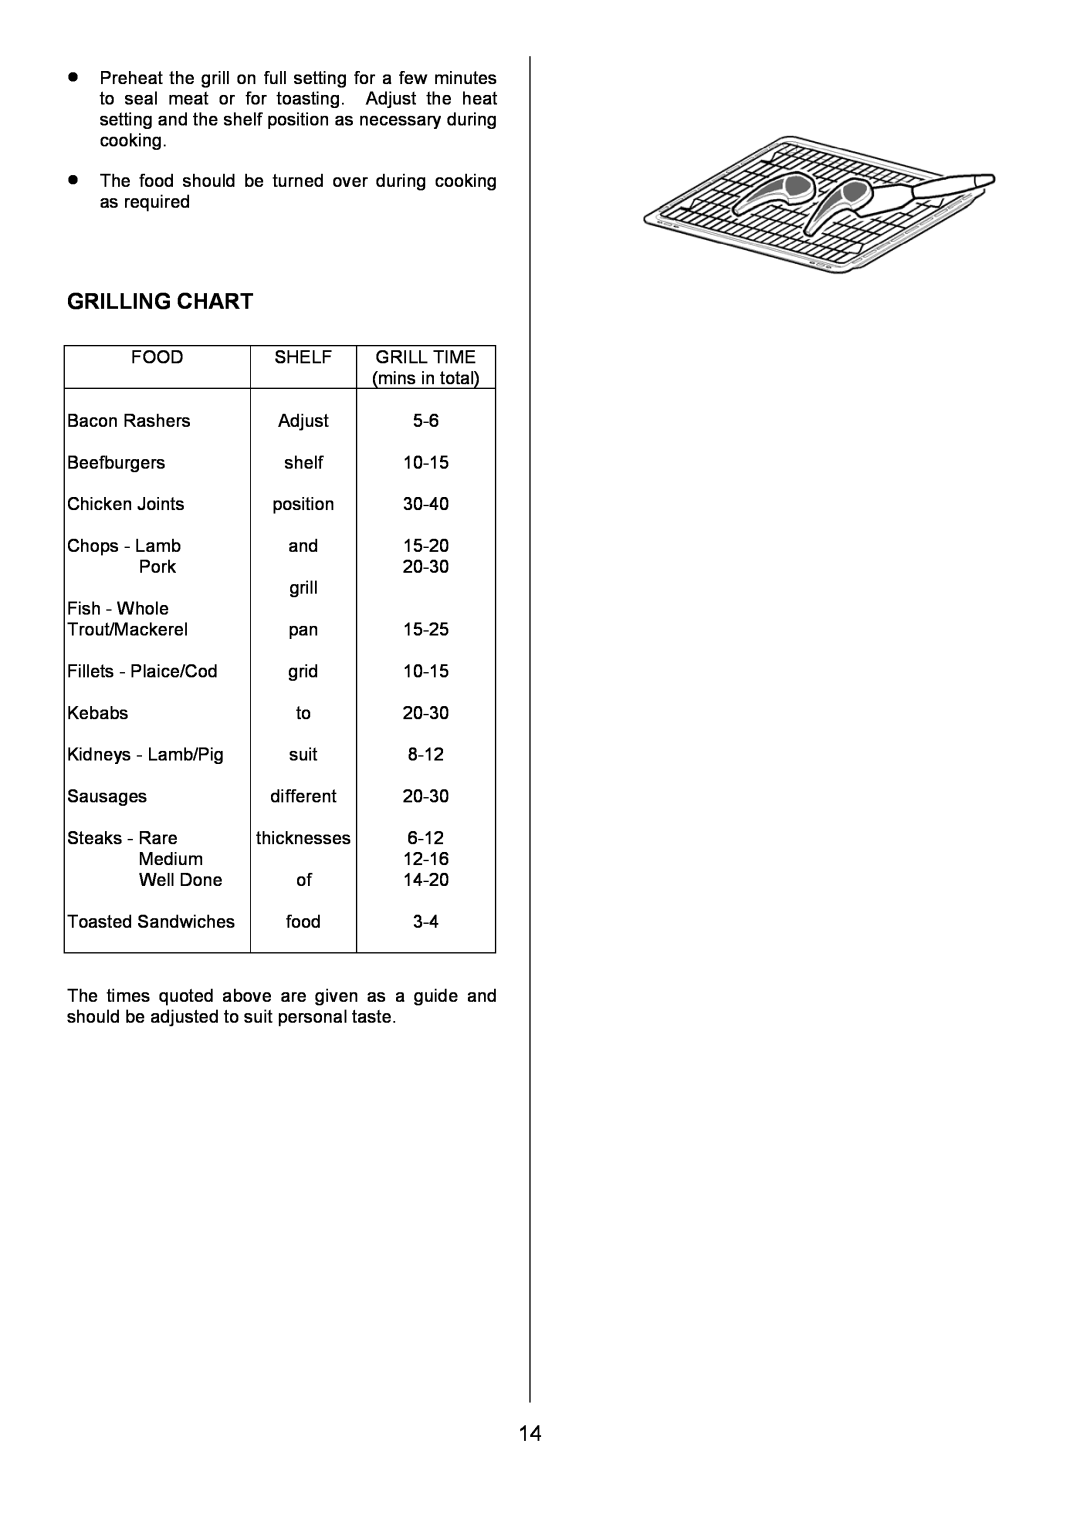 Electrolux D4101-4 operating instructions Grilling Chart 